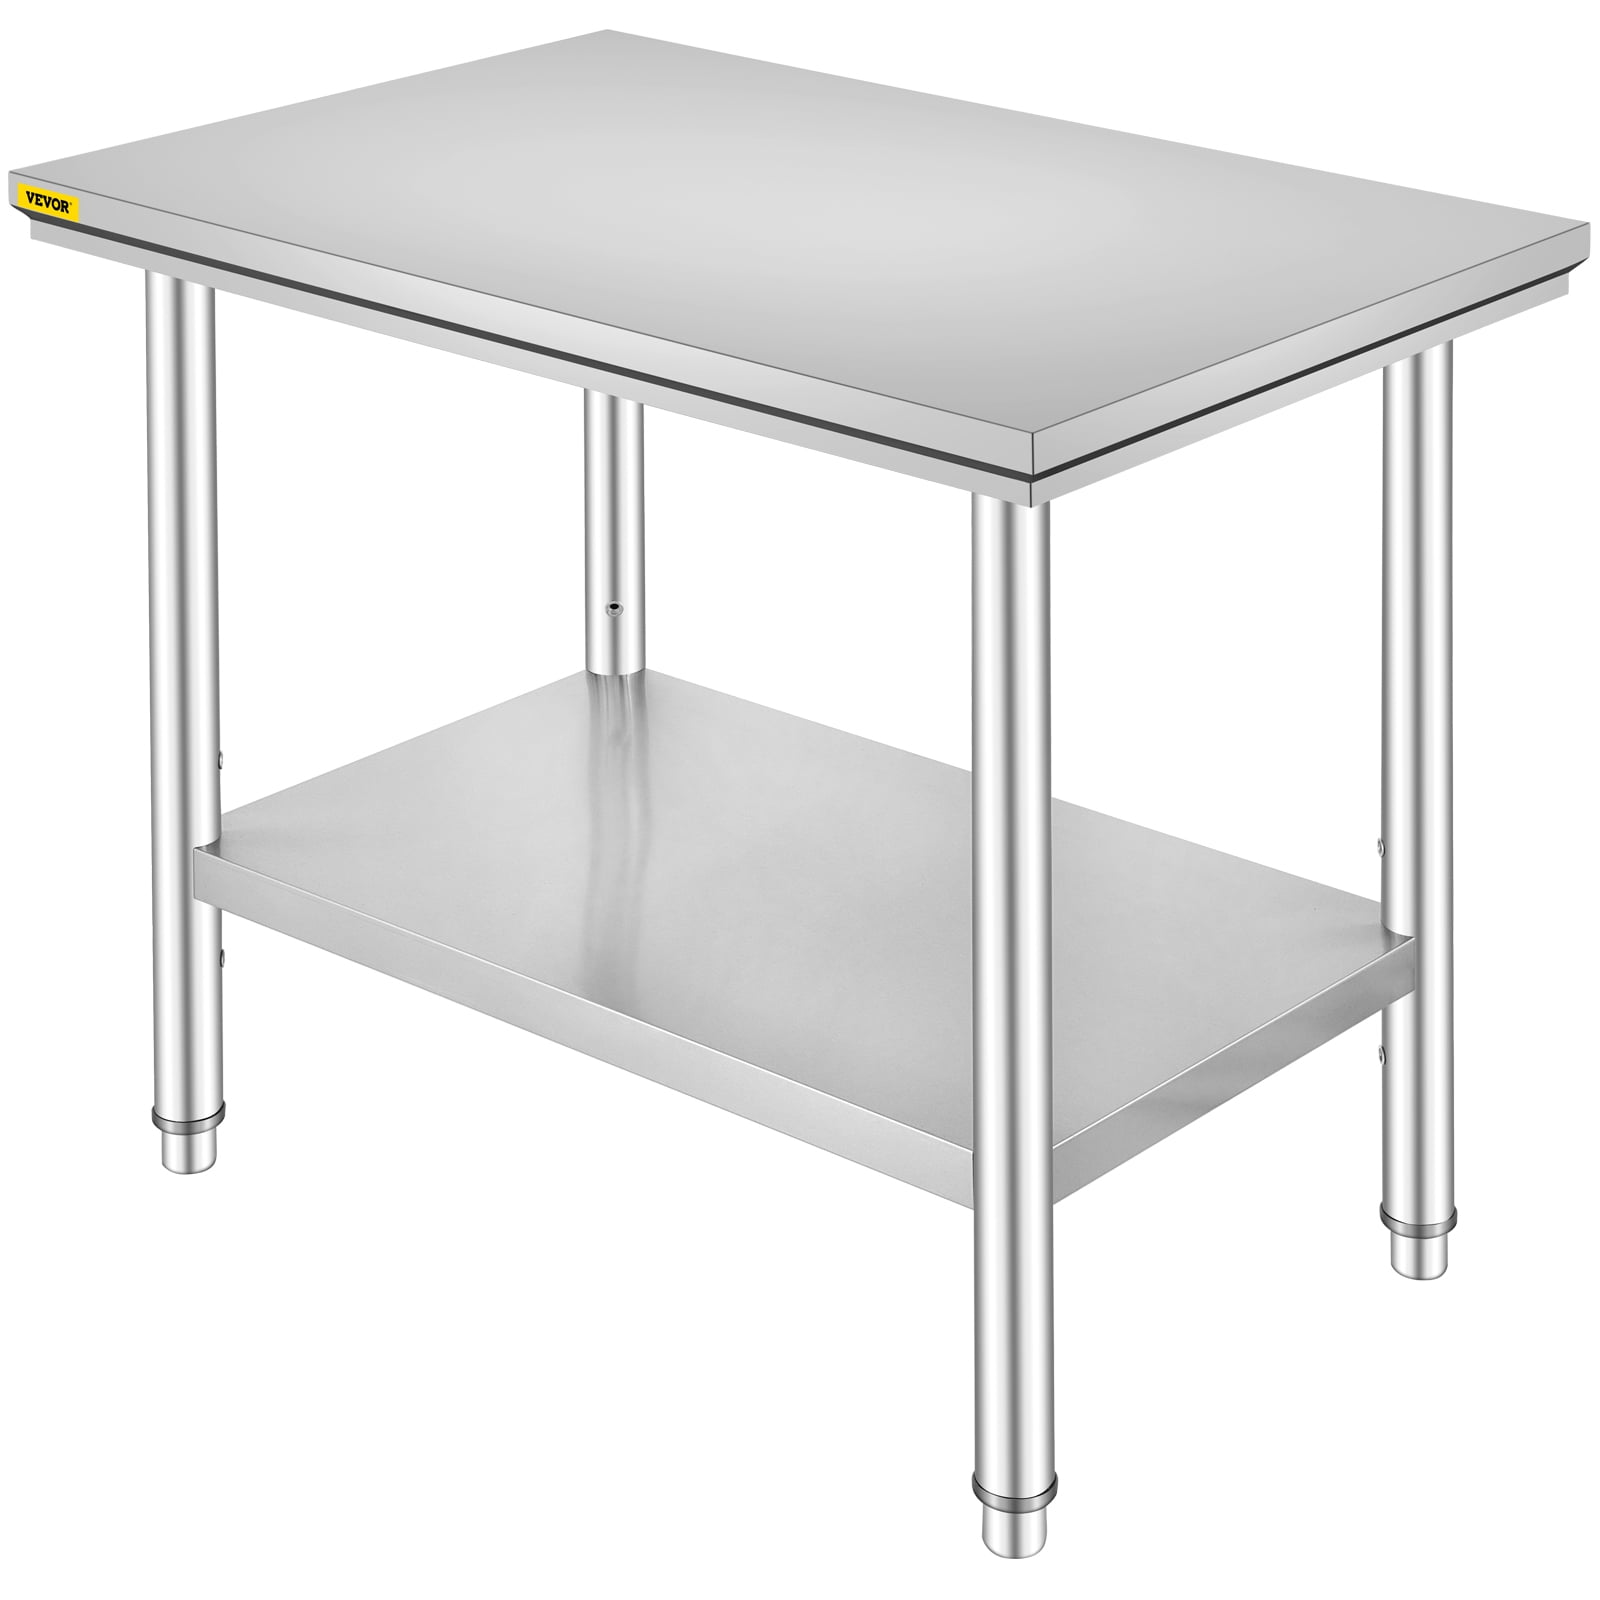 24x36 Inch WMAOT 24 x 36 Inch Stainless Steel Table Commercial Grade NSF Kitchen Work Table